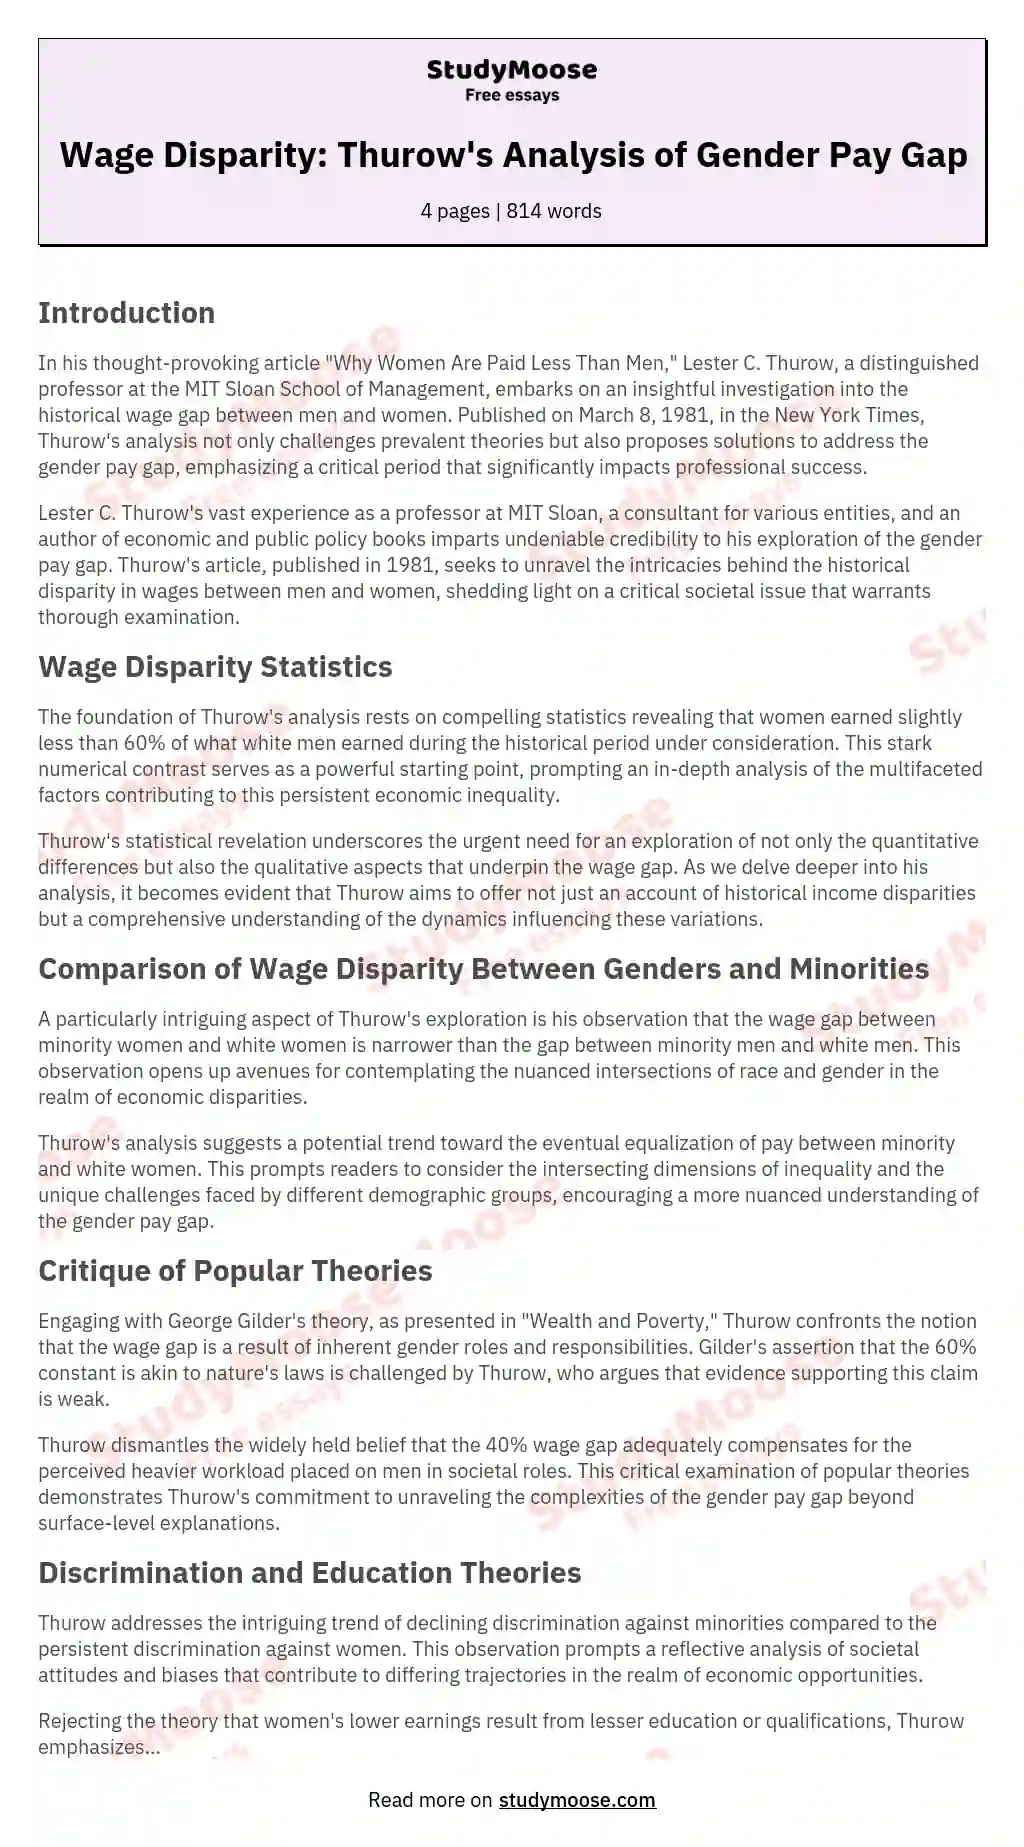 Wage Disparity: Thurow's Analysis of Gender Pay Gap essay